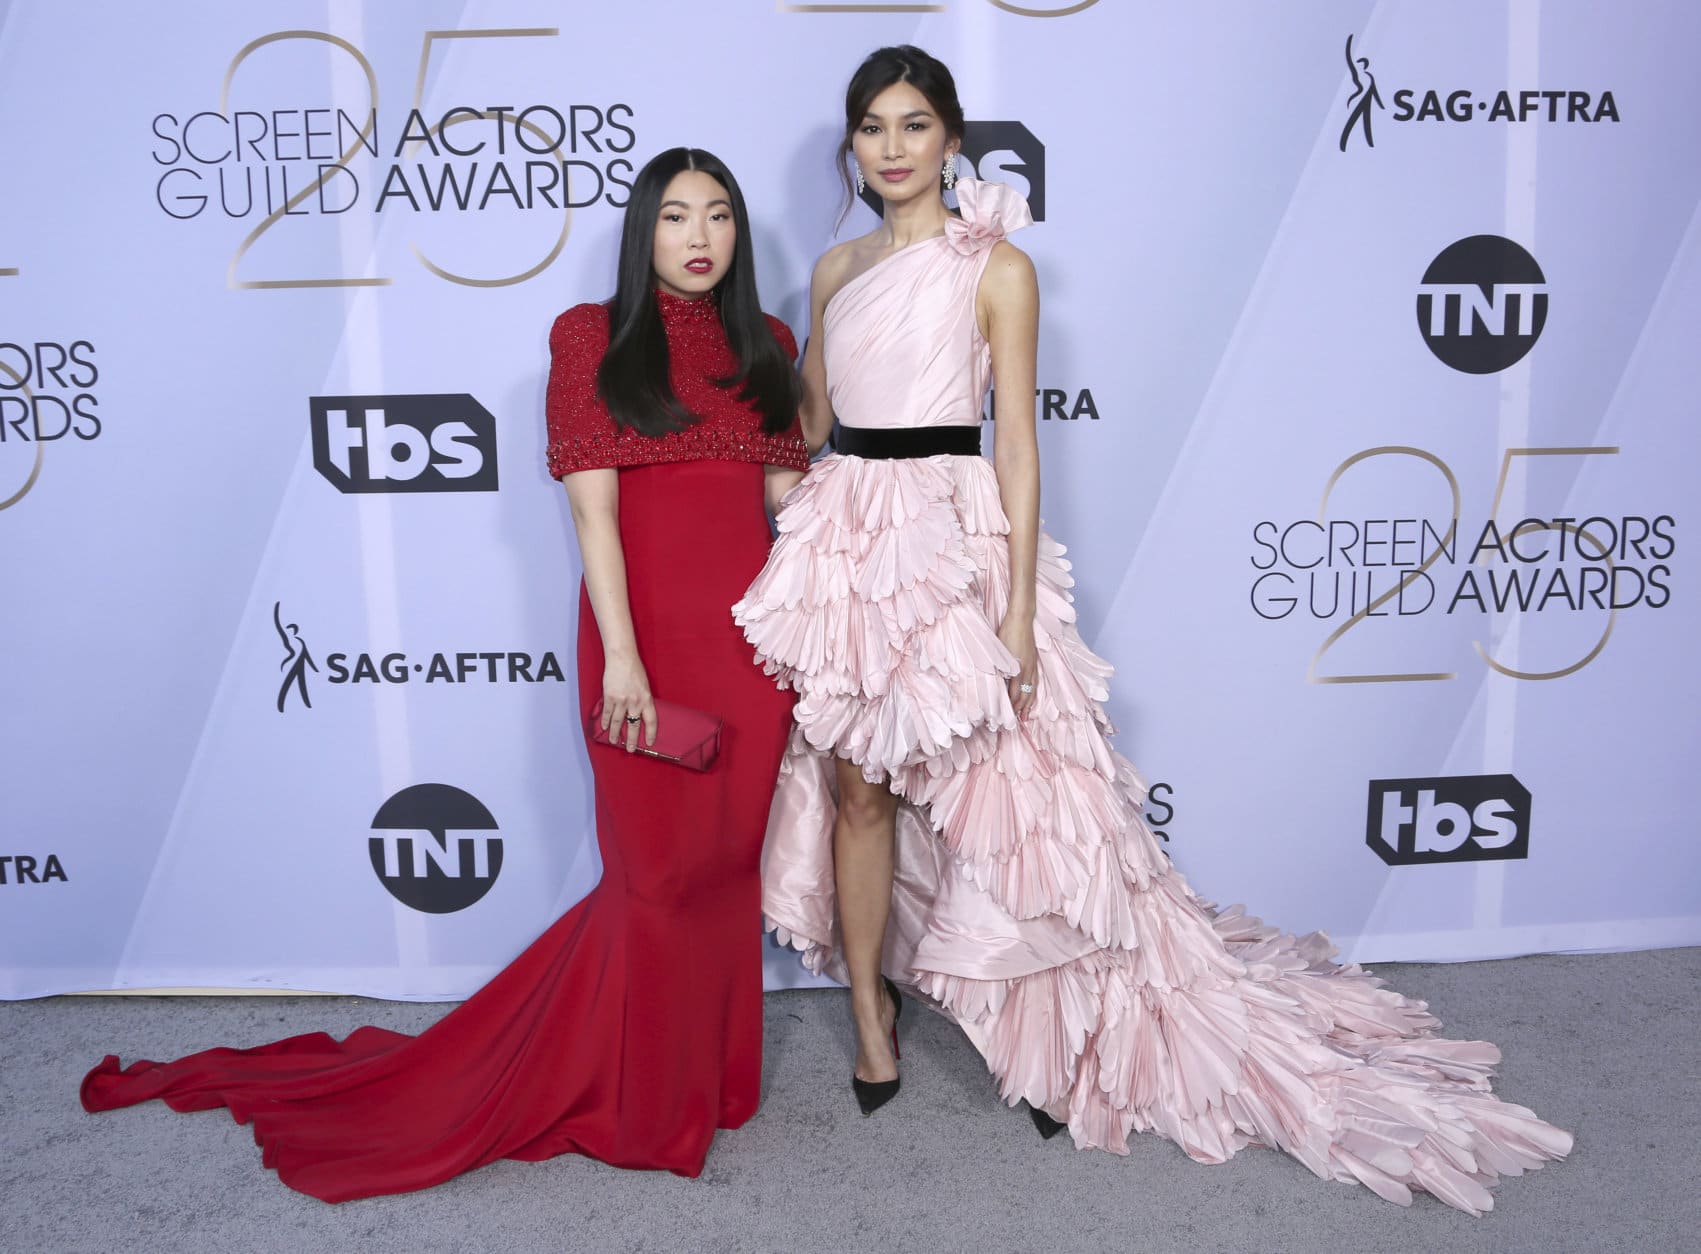 Awkwafina, left, and Gemma Chan arrive at the 25th annual Screen Actors Guild Awards at the Shrine Auditorium &amp; Expo Hall on Sunday, Jan. 27, 2019, in Los Angeles. (Photo by Willy Sanjuan/Invision/AP)